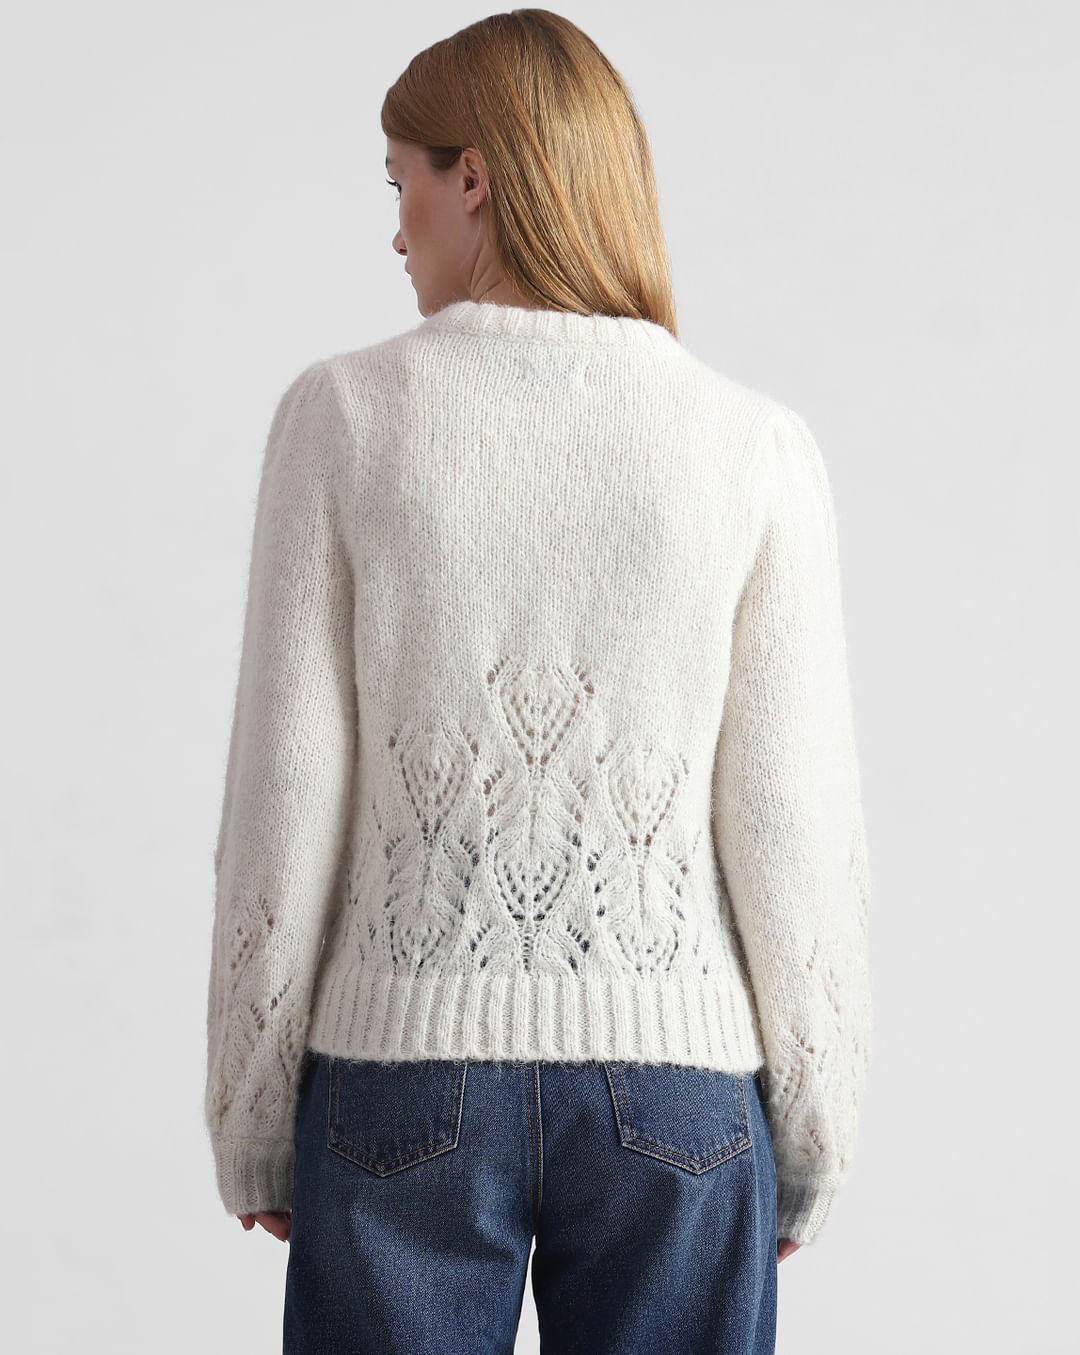 ONLY Cream Pointelle Knit Pullover